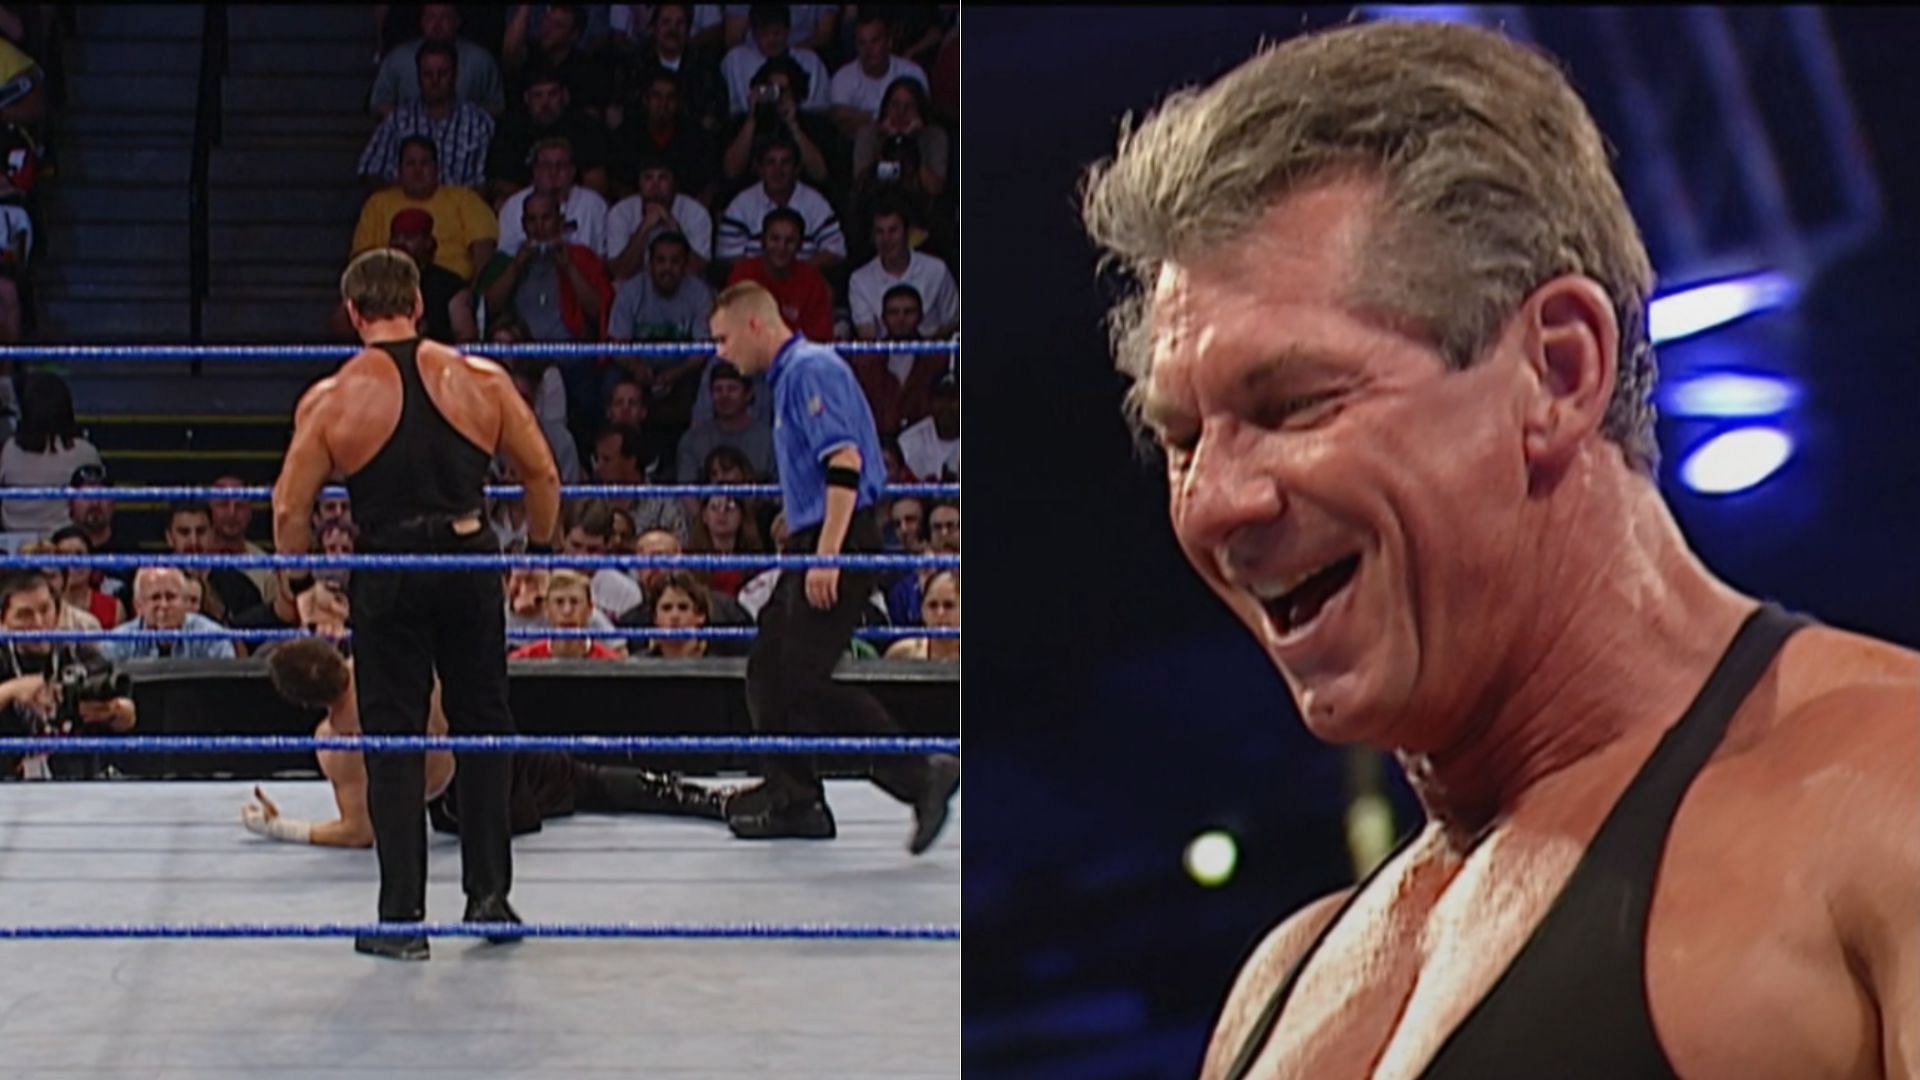 WWE Executive Chairman Vince McMahon used to wrestle sporadically